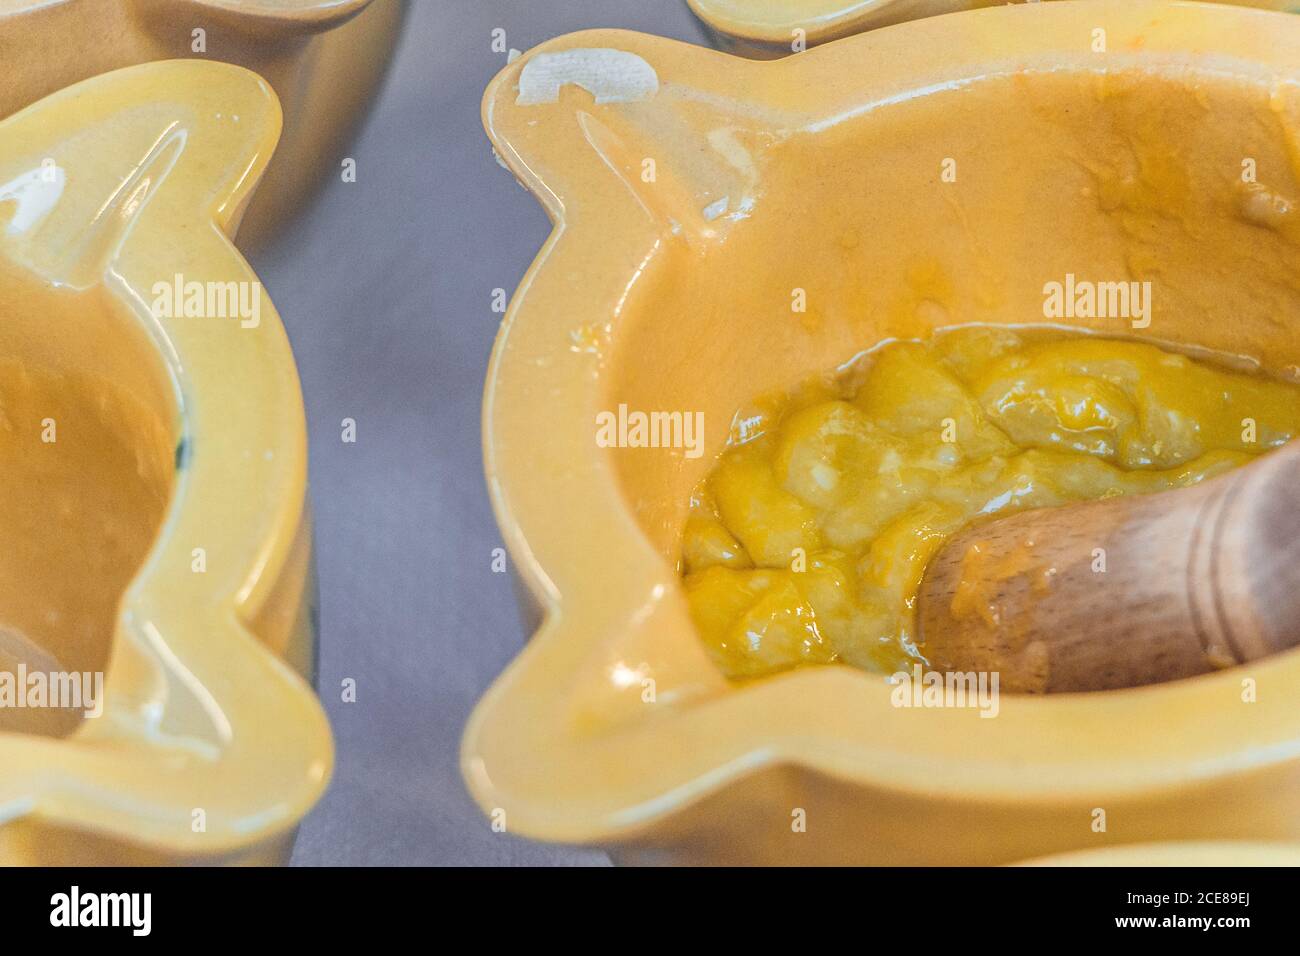 Alioli sauce being prepared in small yellow bowls Stock Photo